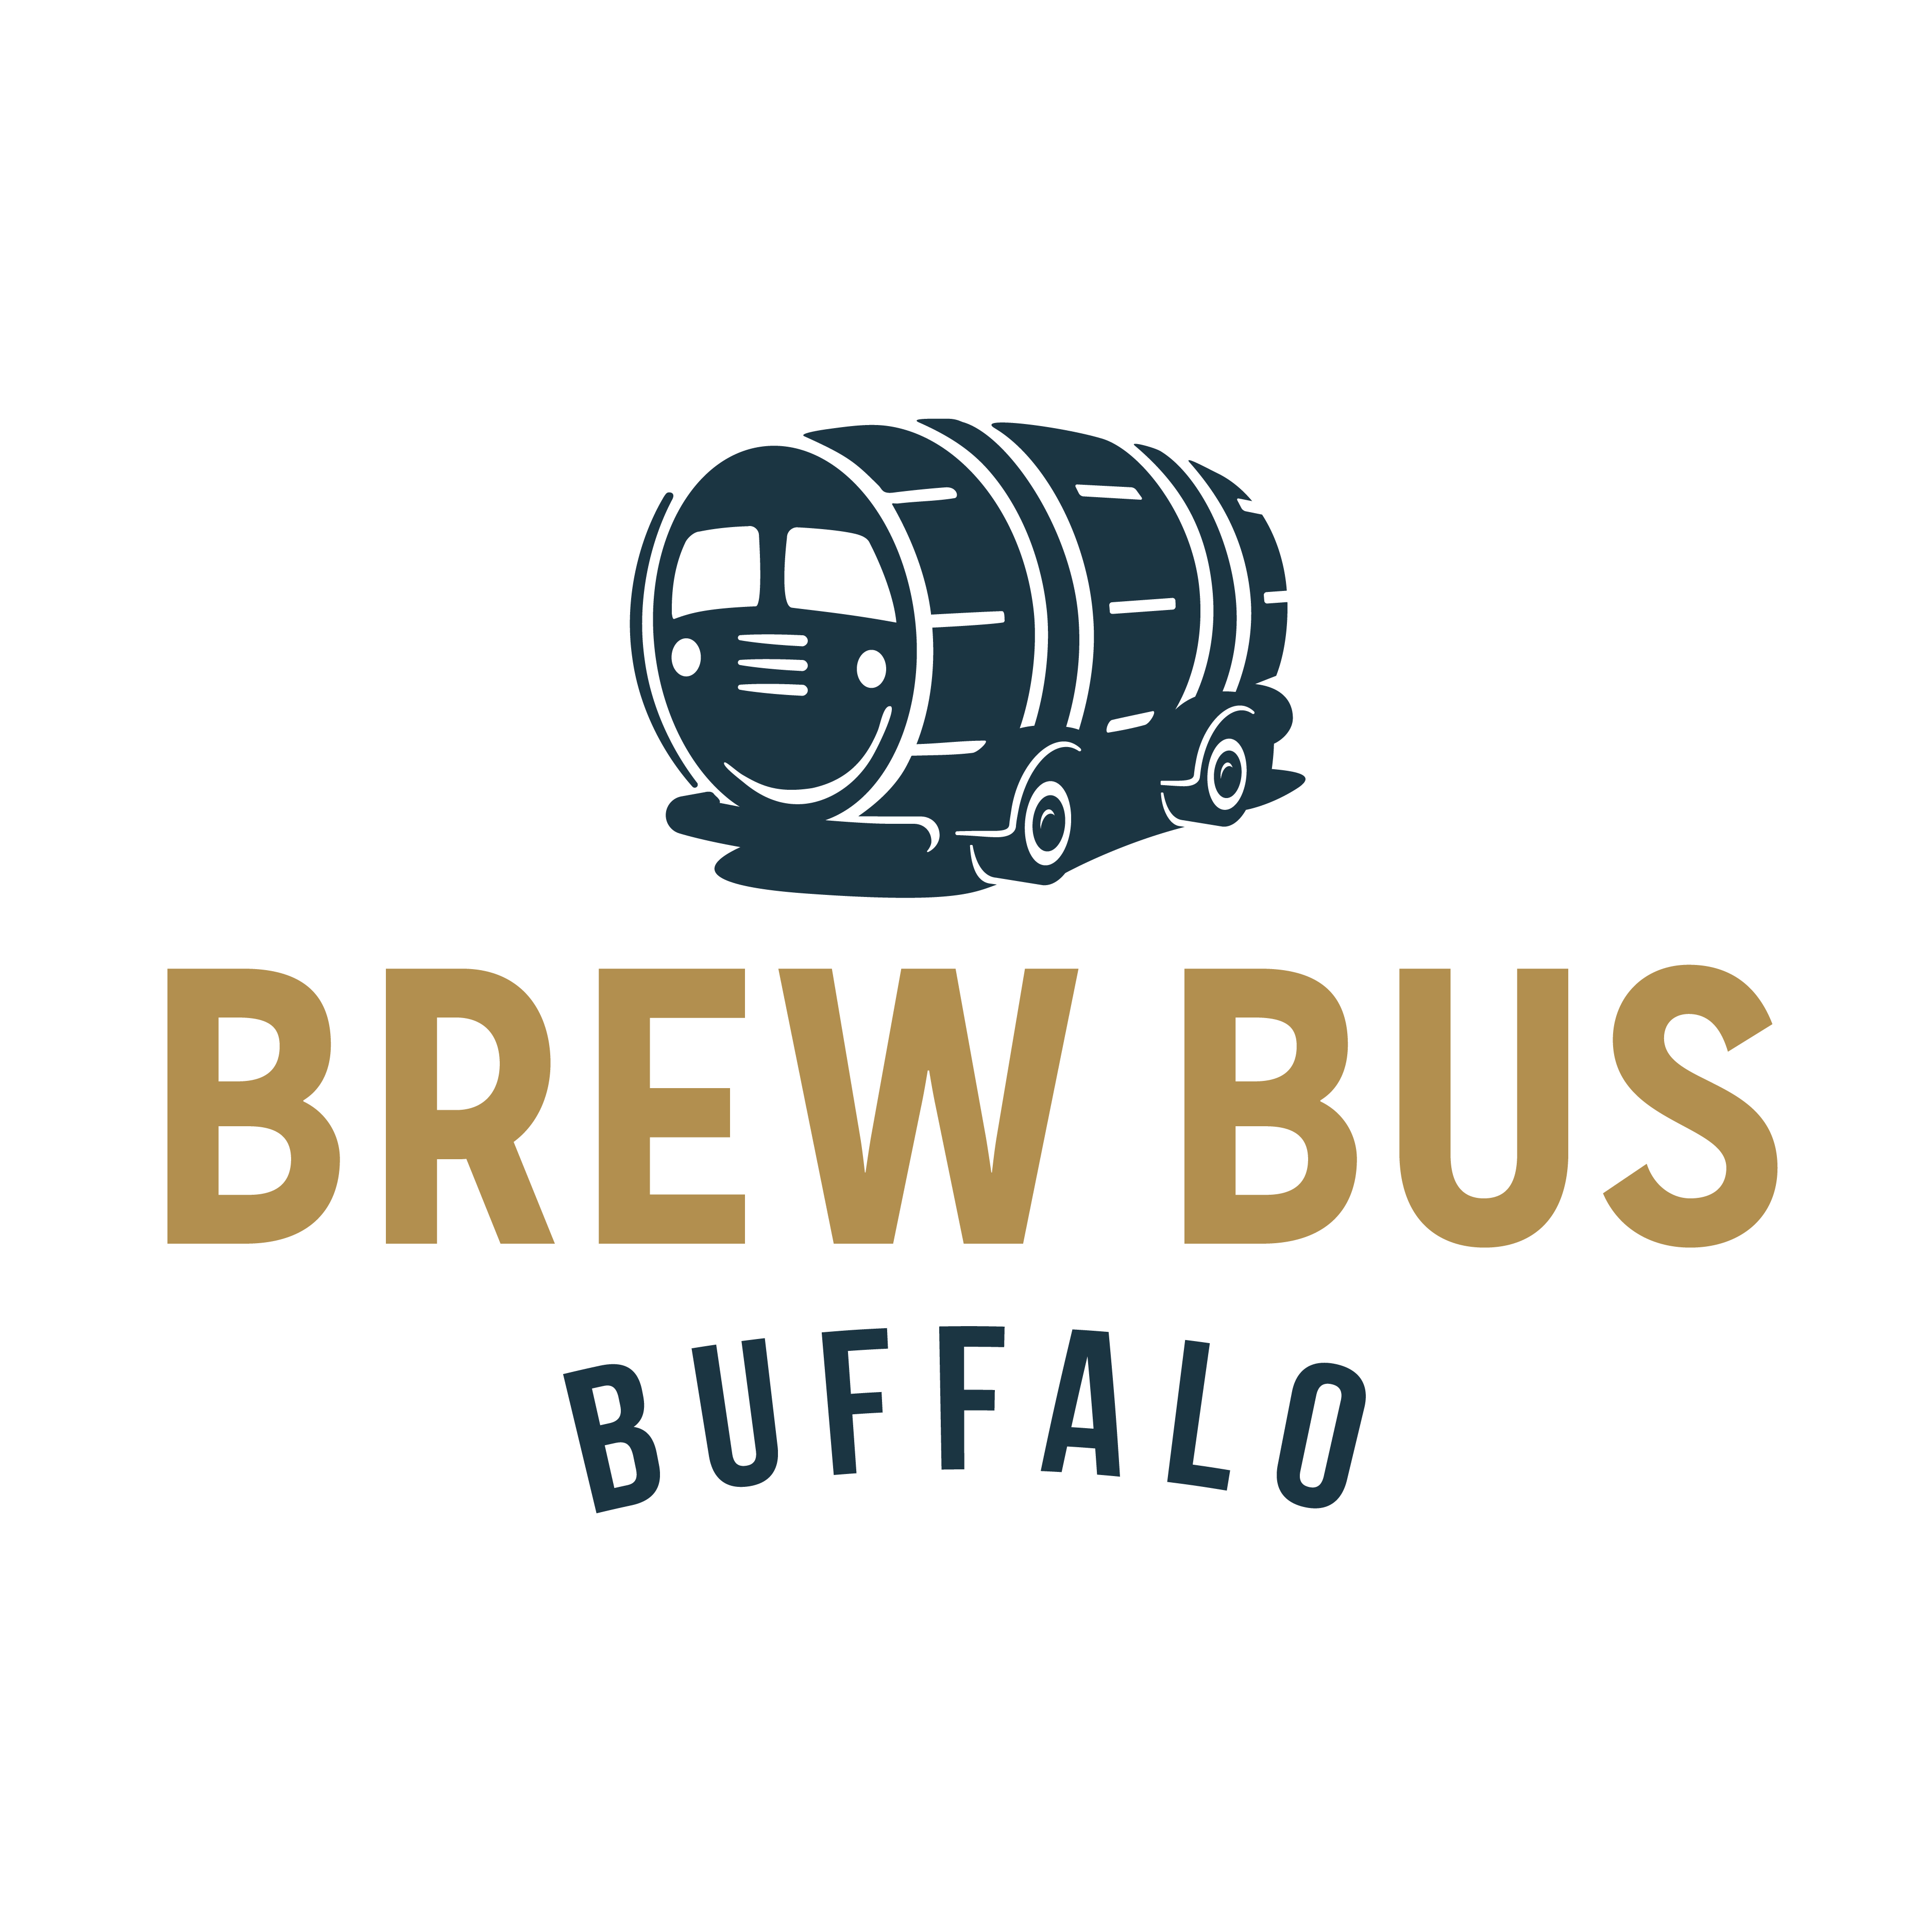 Brew Bus Buffalo Logo logo design by logo designer Renoun Creative for your inspiration and for the worlds largest logo competition